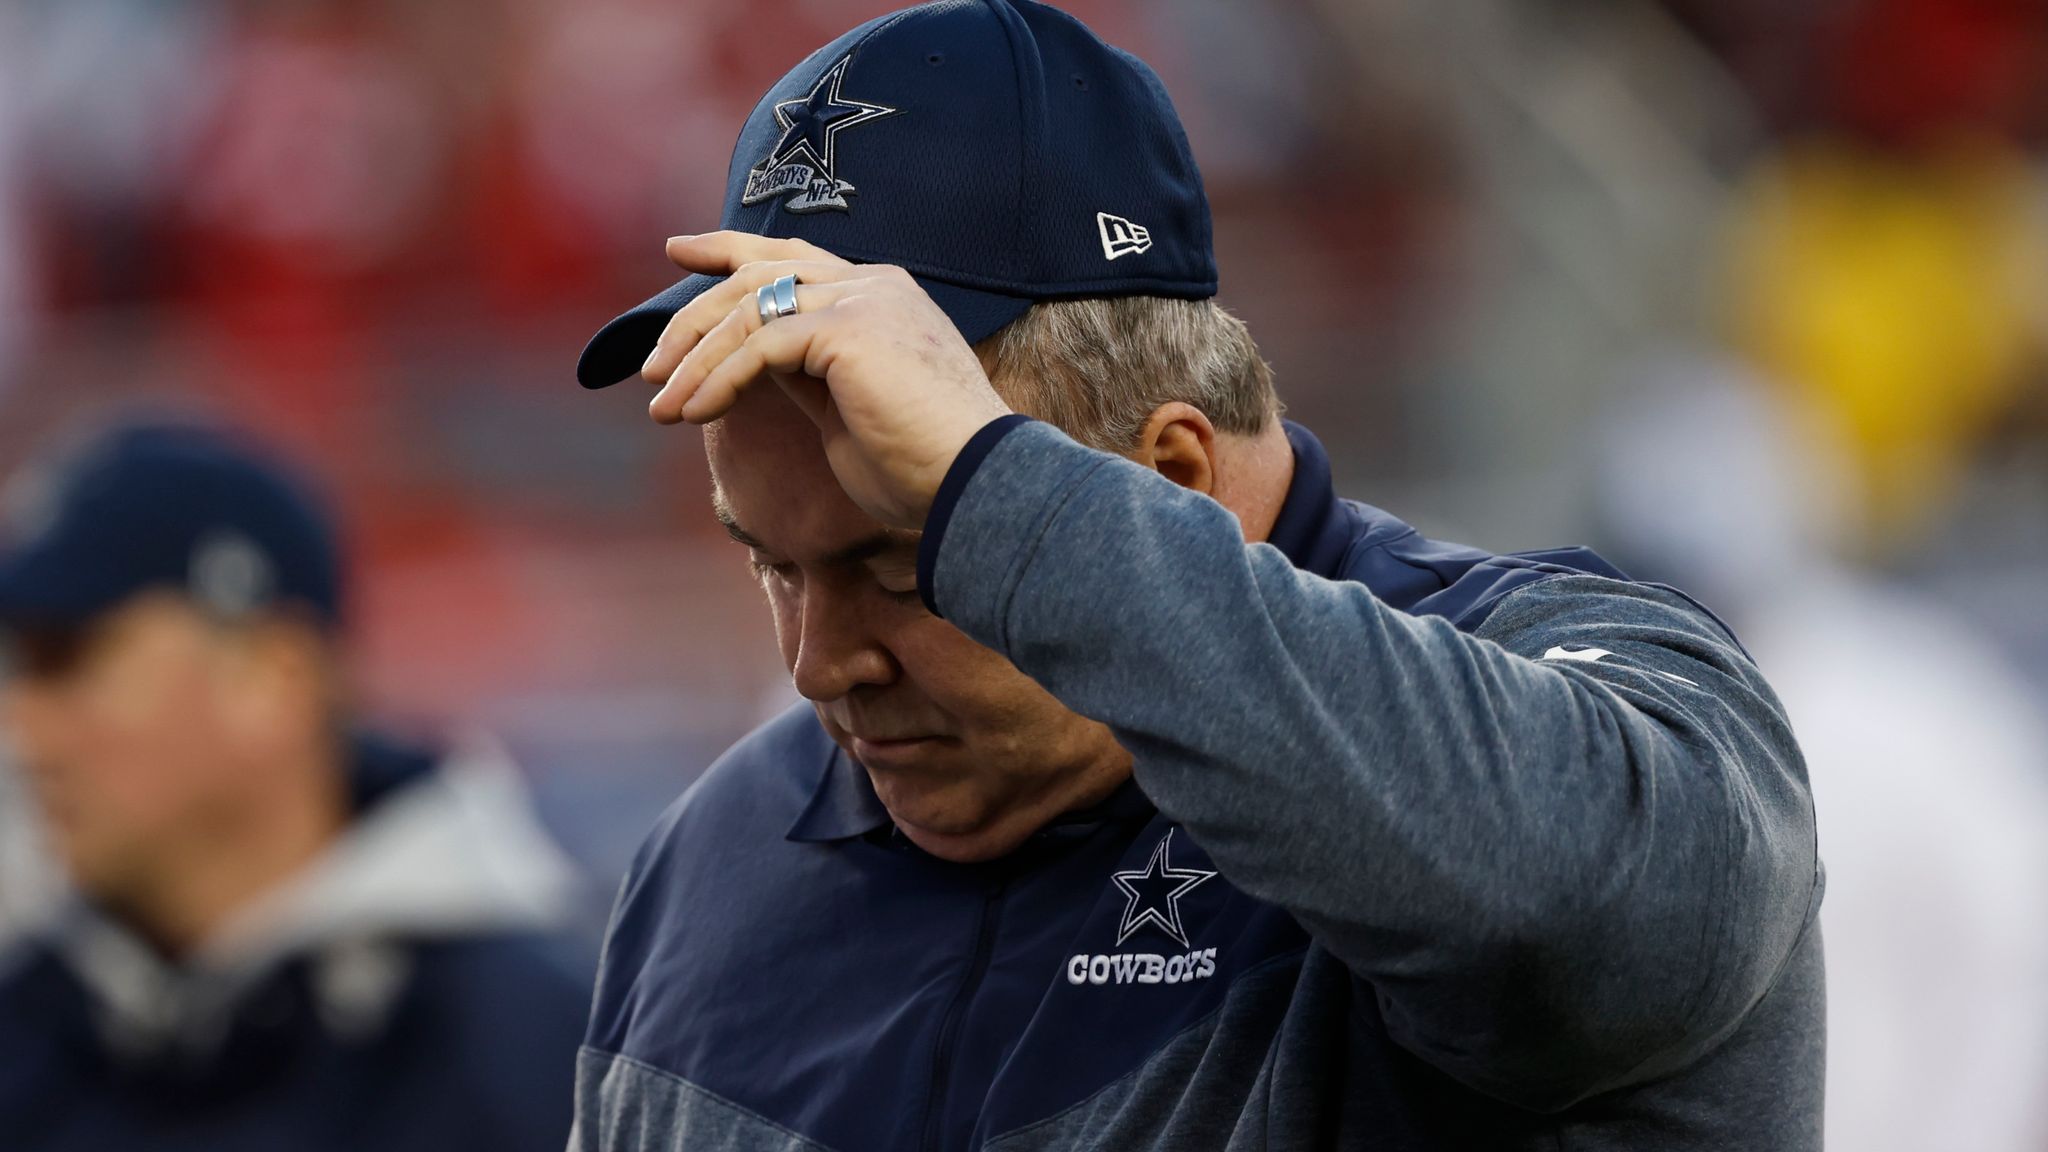 Dallas Cowboys knocked out of playoffs after 19-12 loss to San